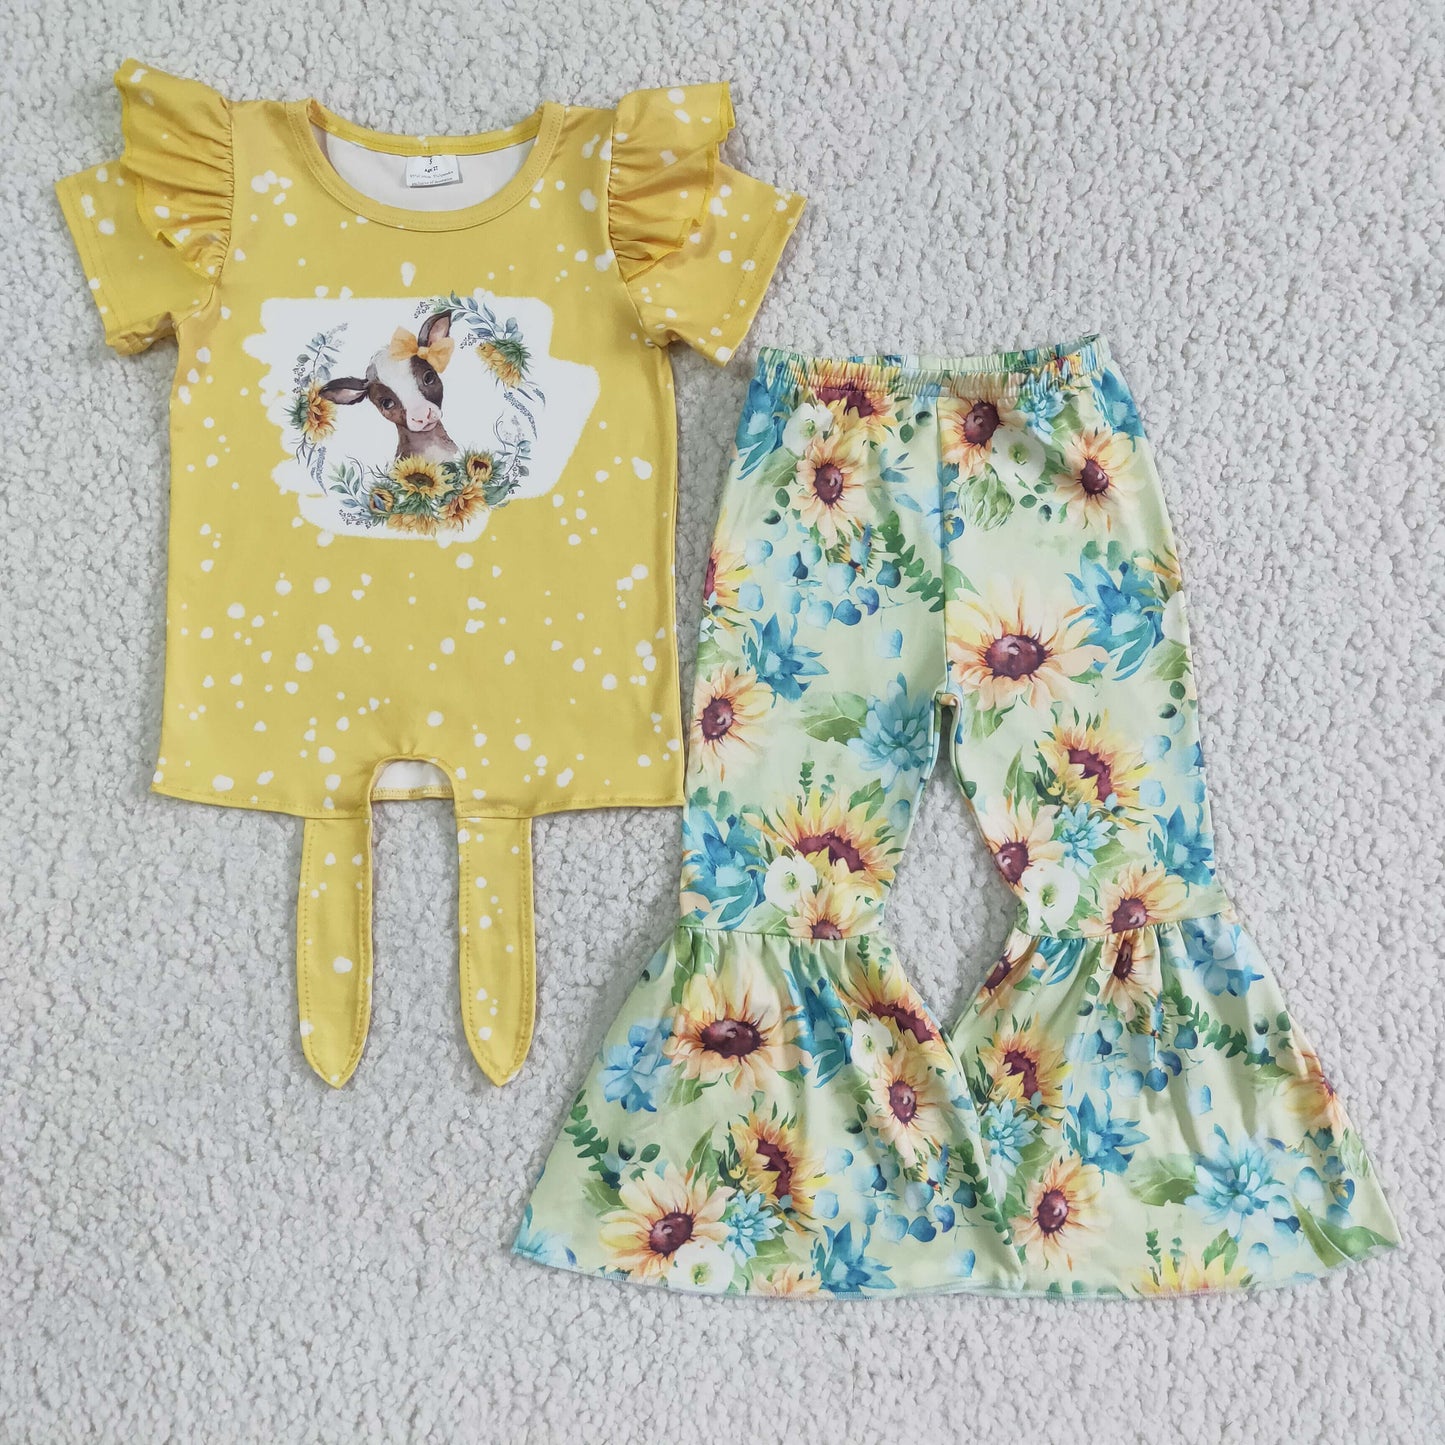 Cow sunflower bell bottom pants baby children clothes